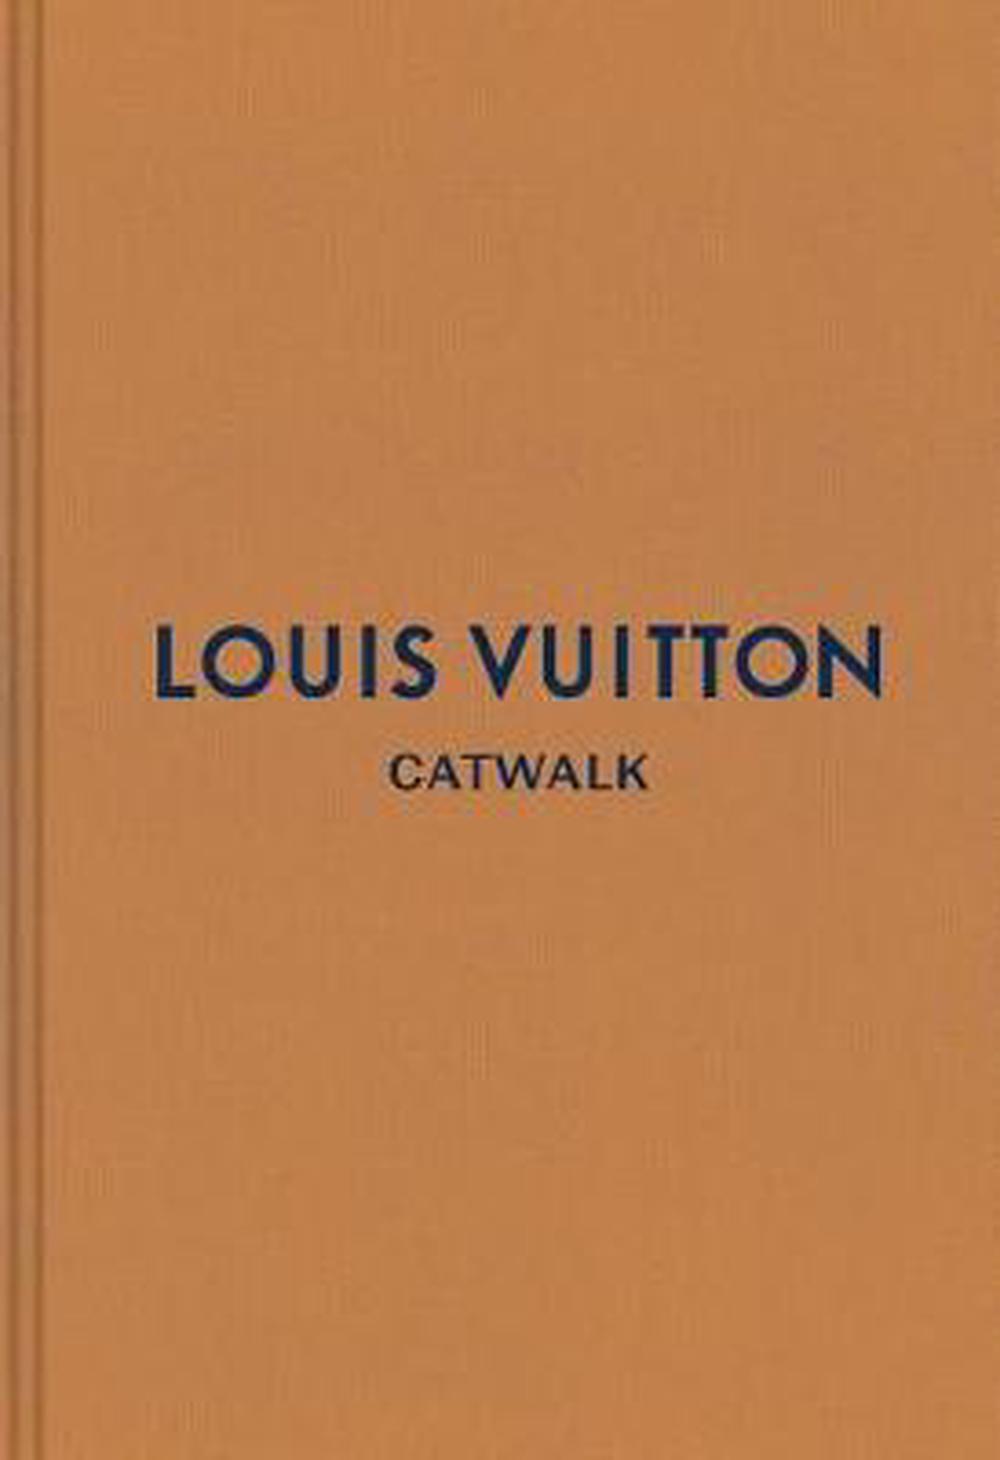 Louis Vuitton: The Complete Fashion Collections Hardcover Book Free ...